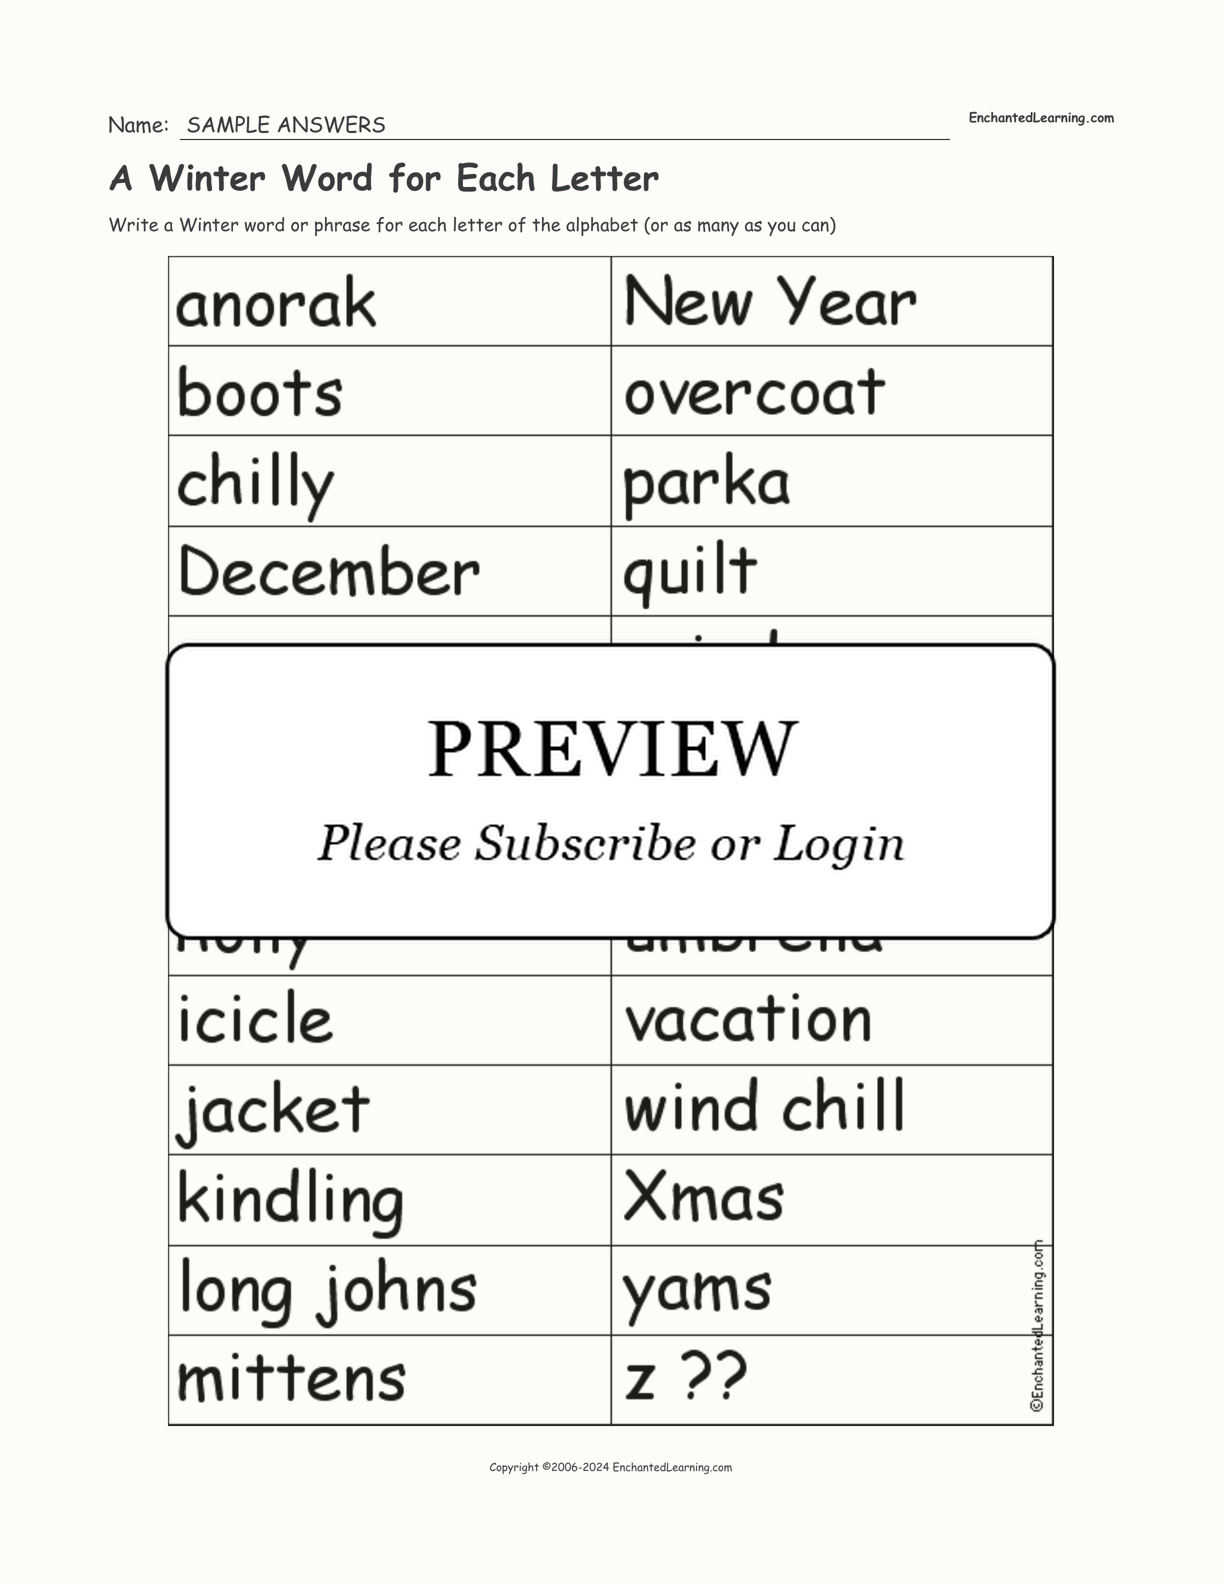 A Winter Word for Each Letter interactive worksheet page 2